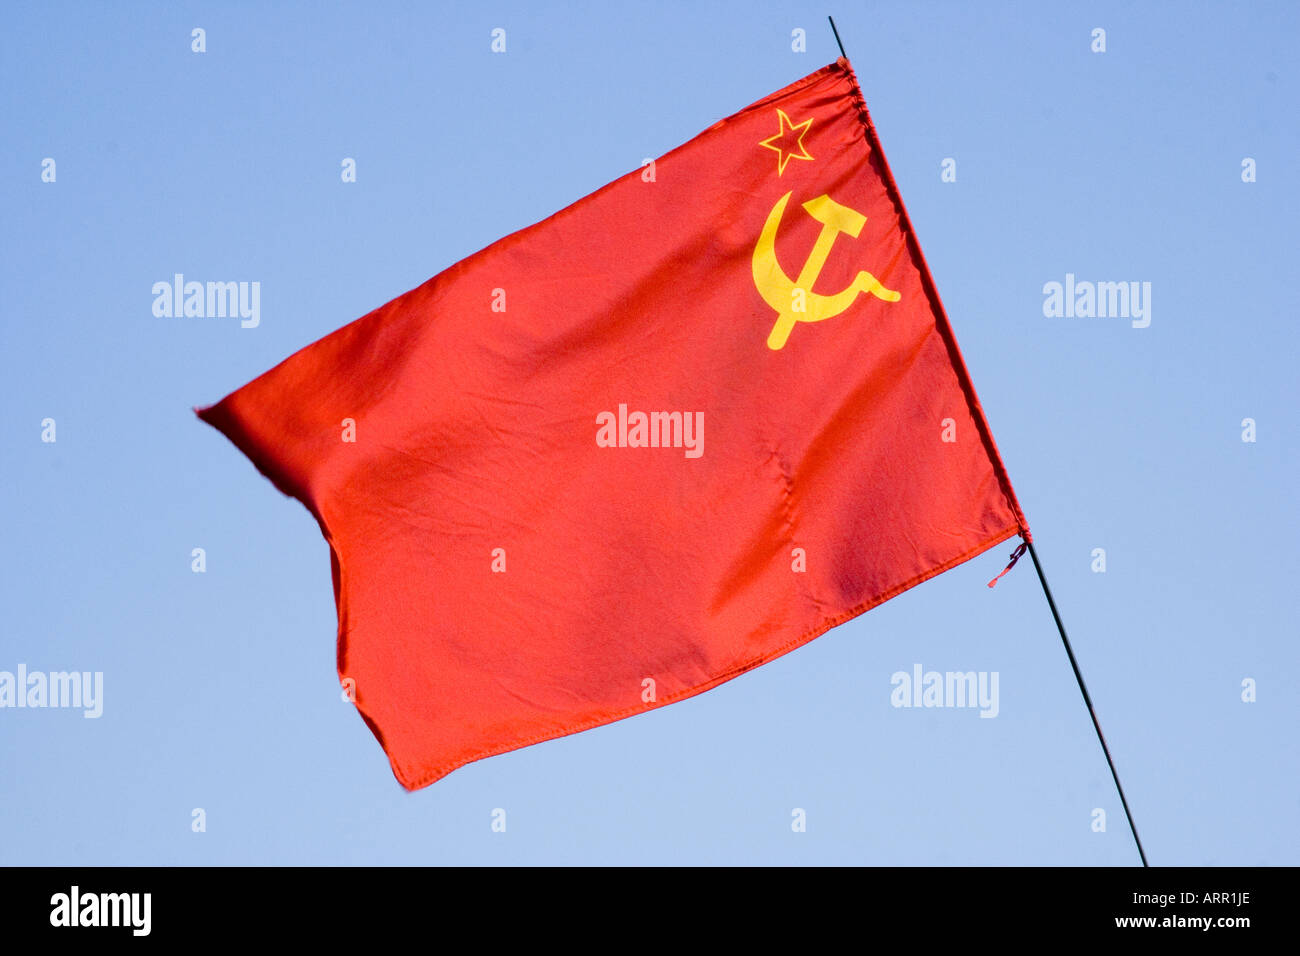 Russian Communist flag, red flag with the hammer and sickle and outline of star in yellow, fluttering against blue sky. Stock Photo